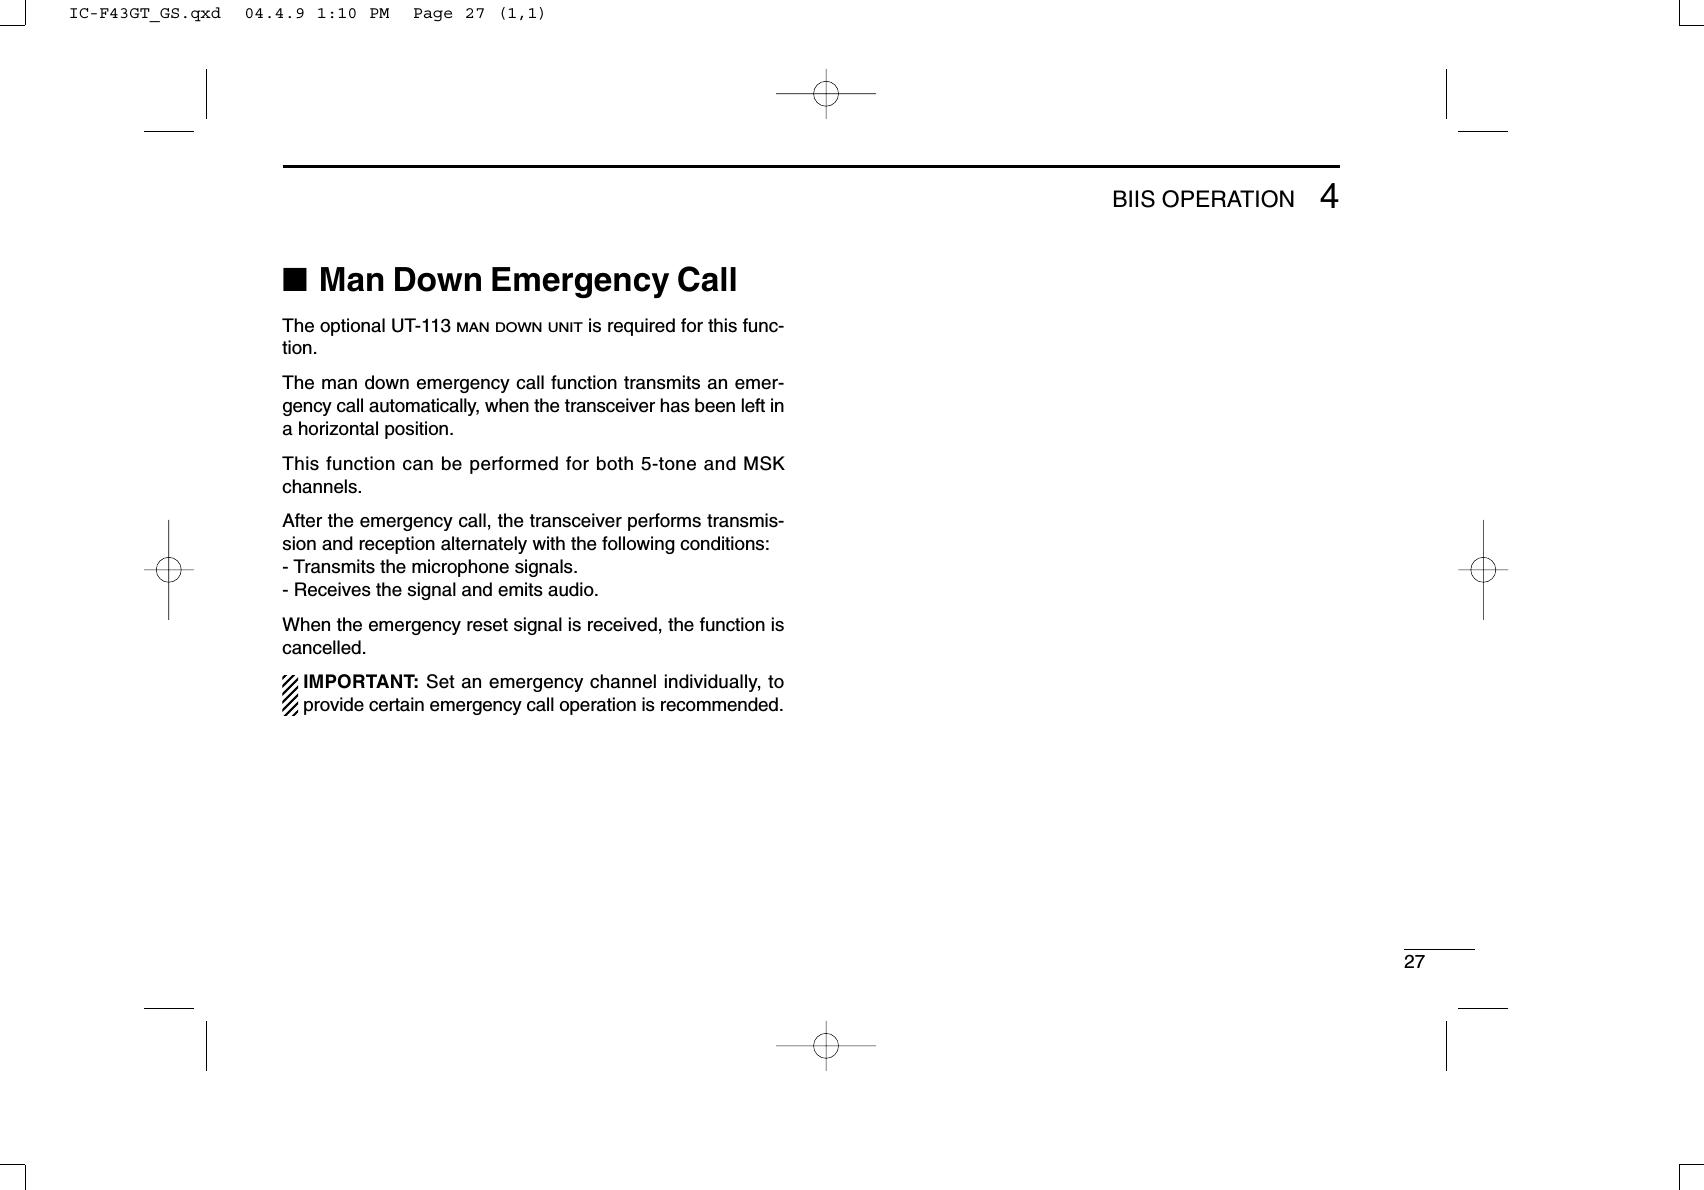 274BIIS OPERATION■Man Down Emergency CallThe optional UT-113 MAN DOWN UNITis required for this func-tion.The man down emergency call function transmits an emer-gency call automatically, when the transceiver has been left ina horizontal position.This function can be performed for both 5-tone and MSKchannels.After the emergency call, the transceiver performs transmis-sion and reception alternately with the following conditions:- Transmits the microphone signals.- Receives the signal and emits audio.When the emergency reset signal is received, the function iscancelled.IMPORTANT: Set an emergency channel individually, toprovide certain emergency call operation is recommended.IC-F43GT_GS.qxd  04.4.9 1:10 PM  Page 27 (1,1)